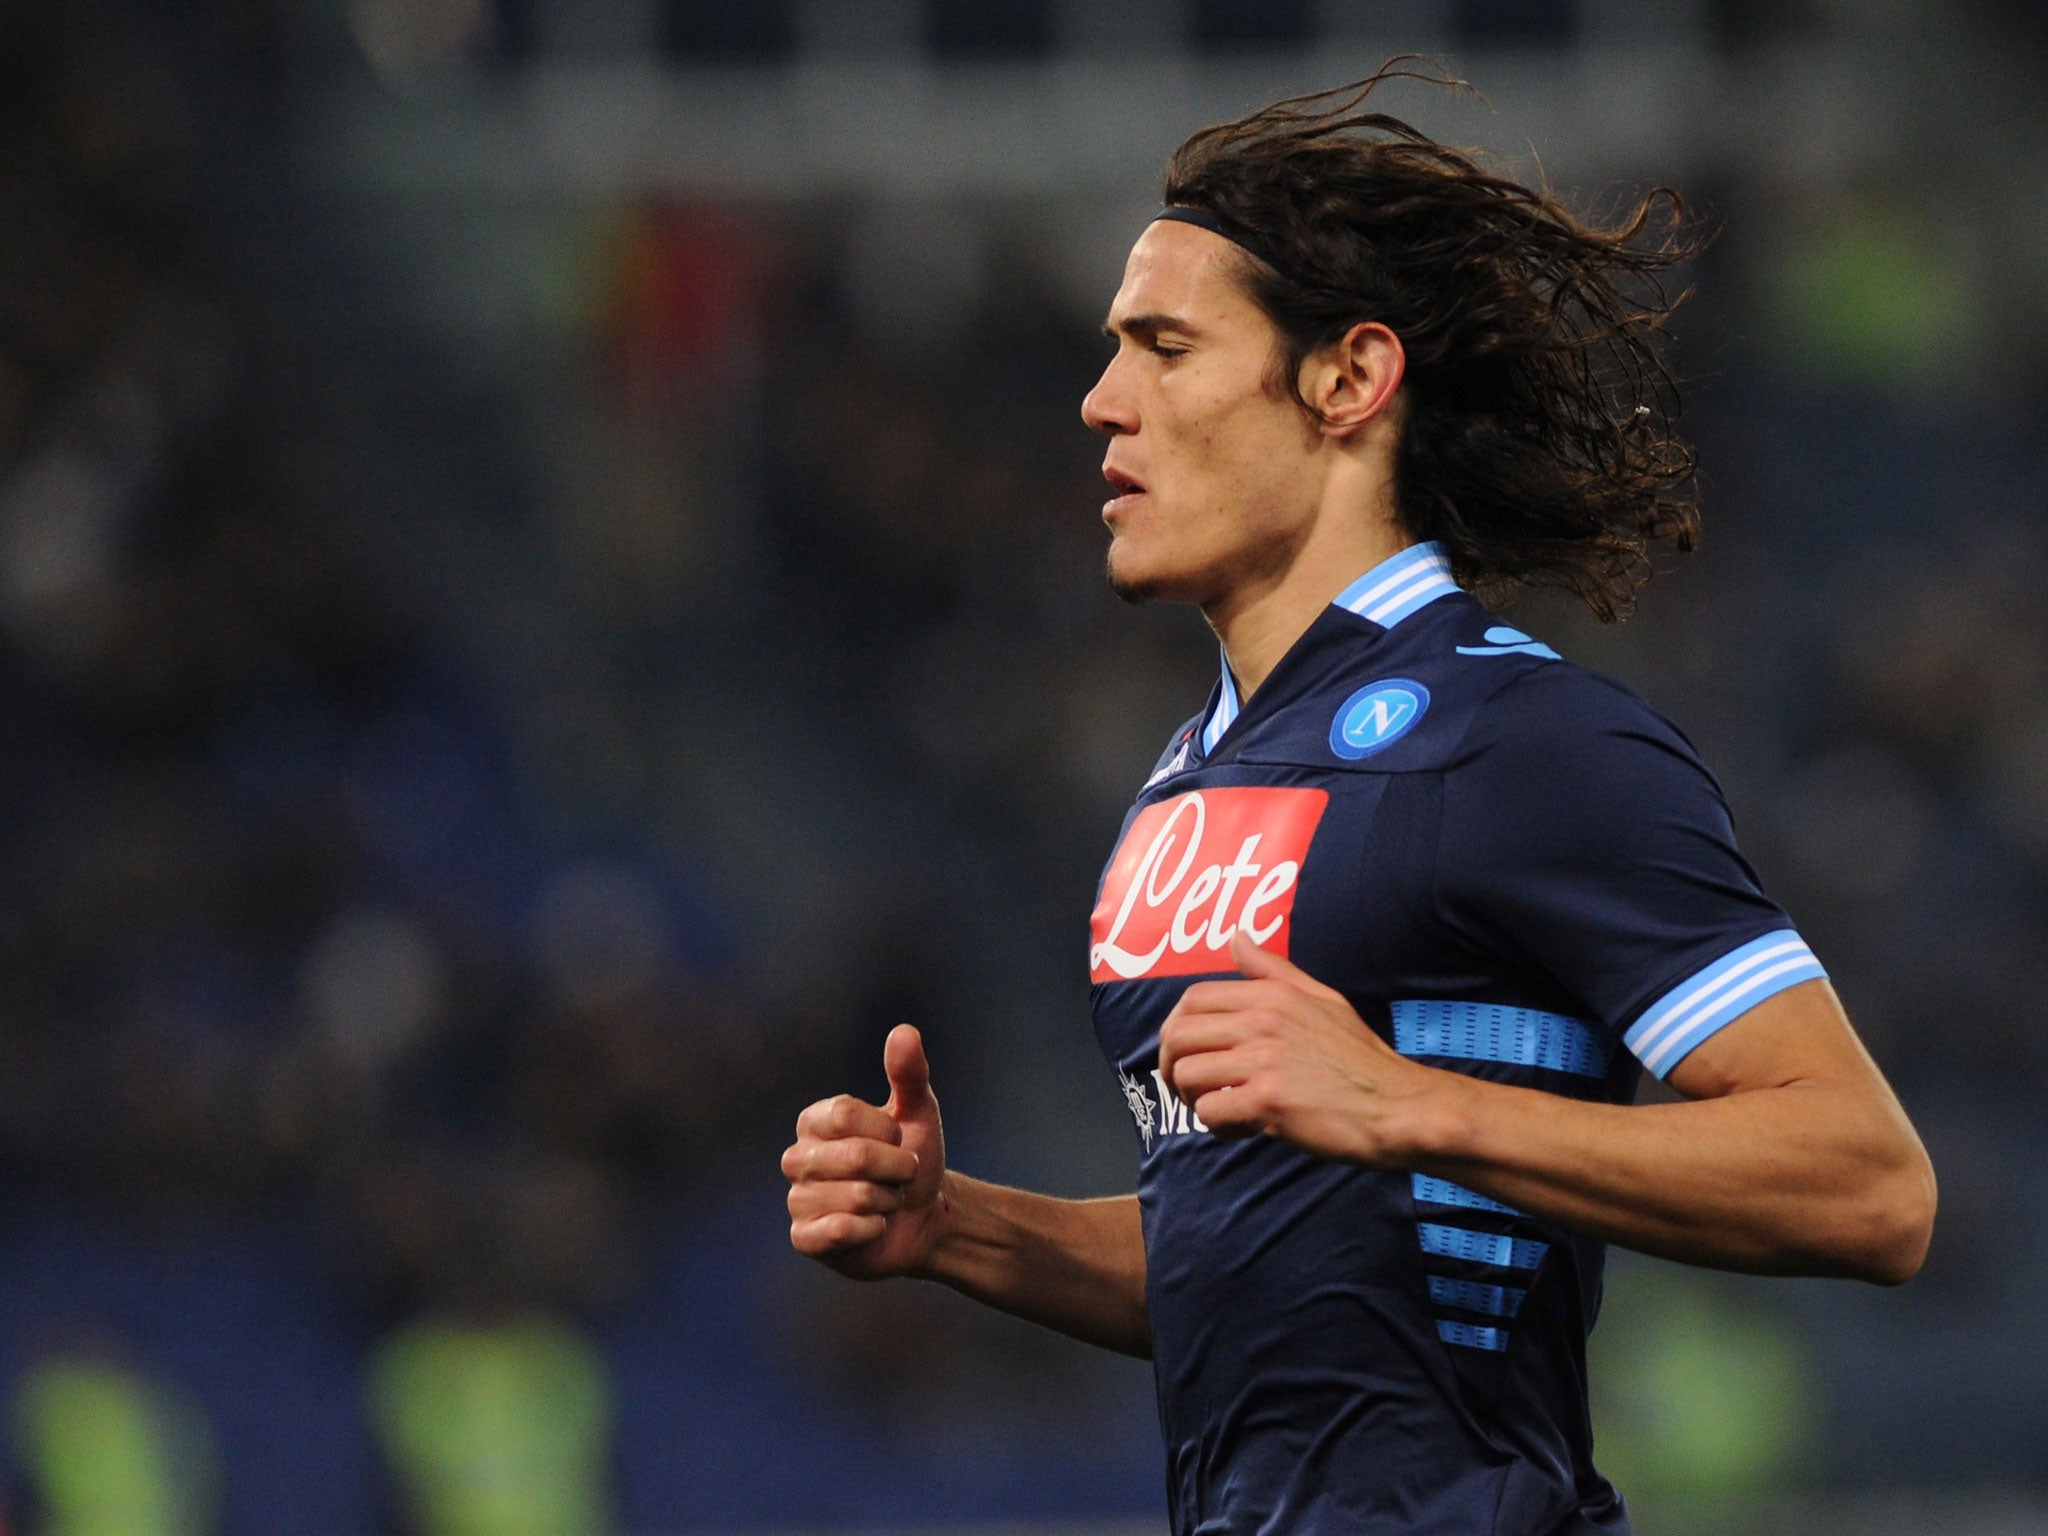 Napoli's Edinson Cavani has scored 18 goals in Serie A this season and could command a fee of £52m